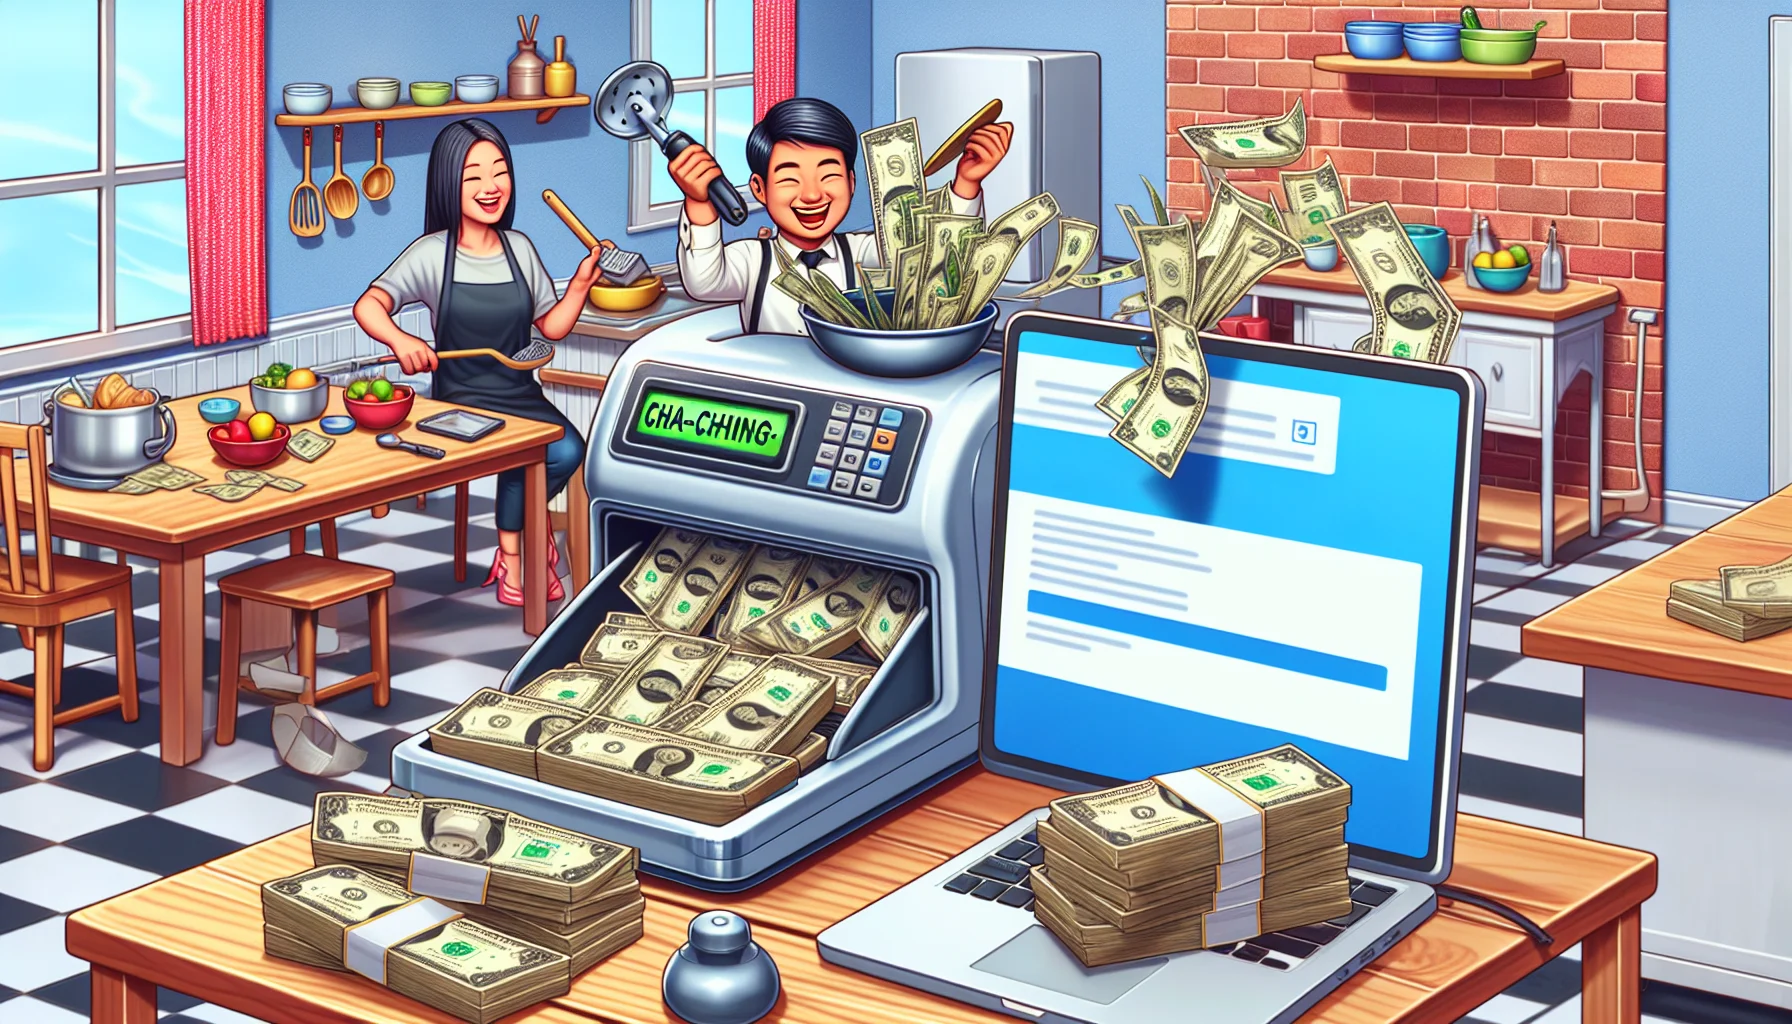 Imagine an engaging and humorous scenario related to making money online, set in a well-equipped kitchen showcasing a variety of unbranded kitchen tools, commonly associated with the kind you find from a popular kitchen gadget brand. An animated cash register is cha-chinging loudly, each time the sound rings, crisp dollar bills are popping out. There's a glowing laptop opened to a browser, displaying a web page that reads 'Affiliate Program'. A cheerful person, perhaps an Asian male, is using kitchen tools while another person, perhaps a Black female, is counting the money popping out from the cash register.